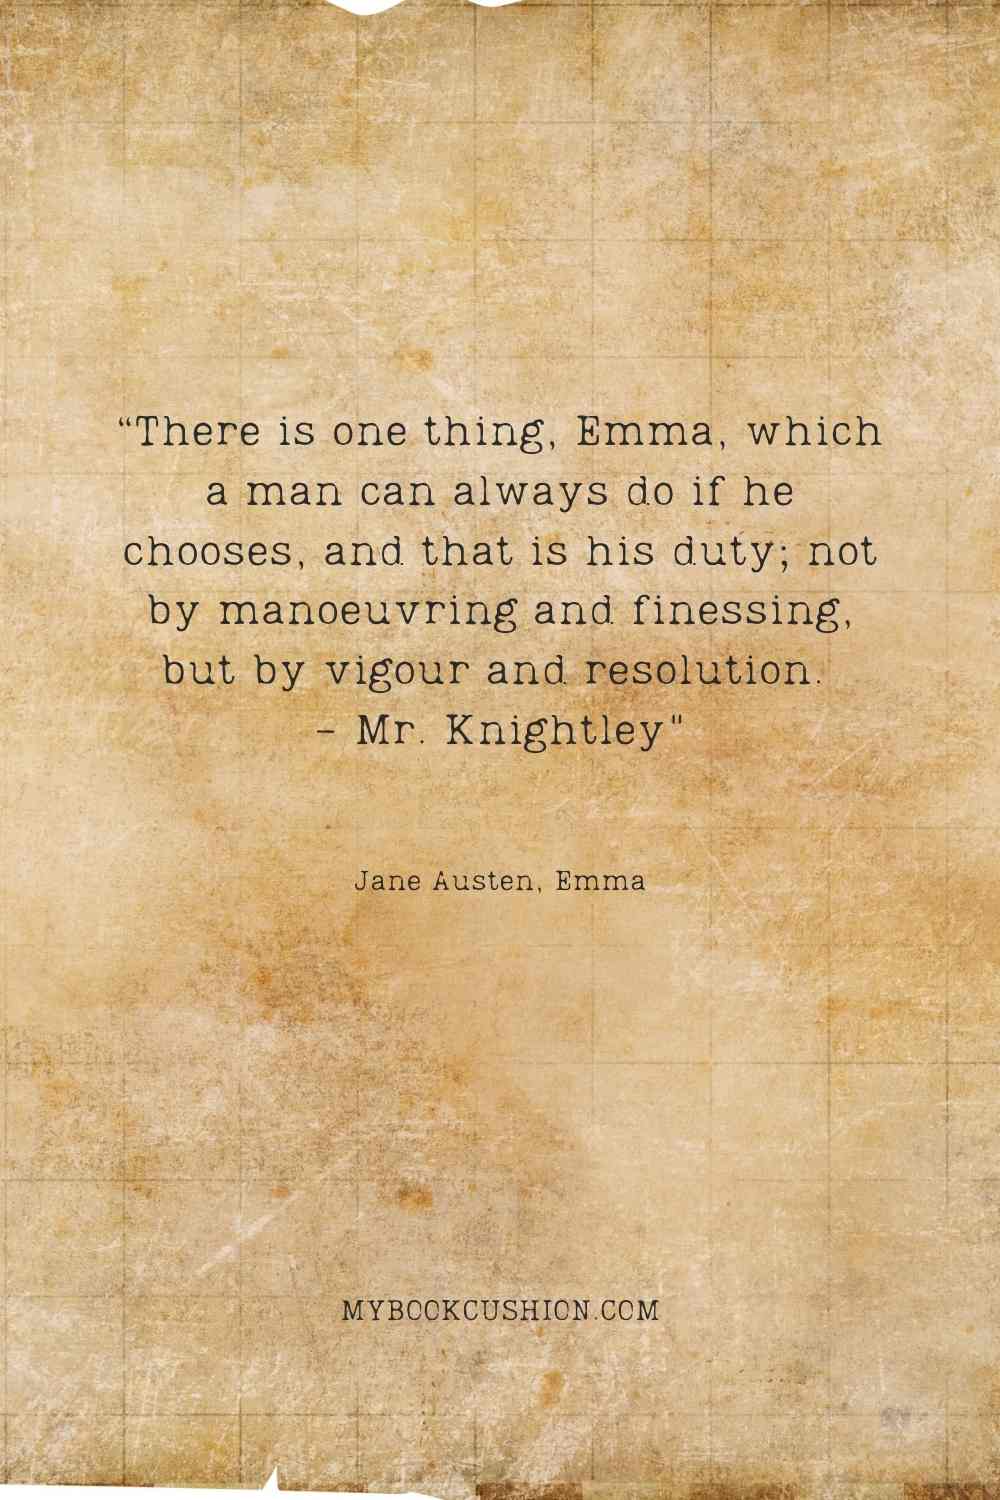 “There is one thing, Emma, which a man can always do if he chooses, and that is his duty;"